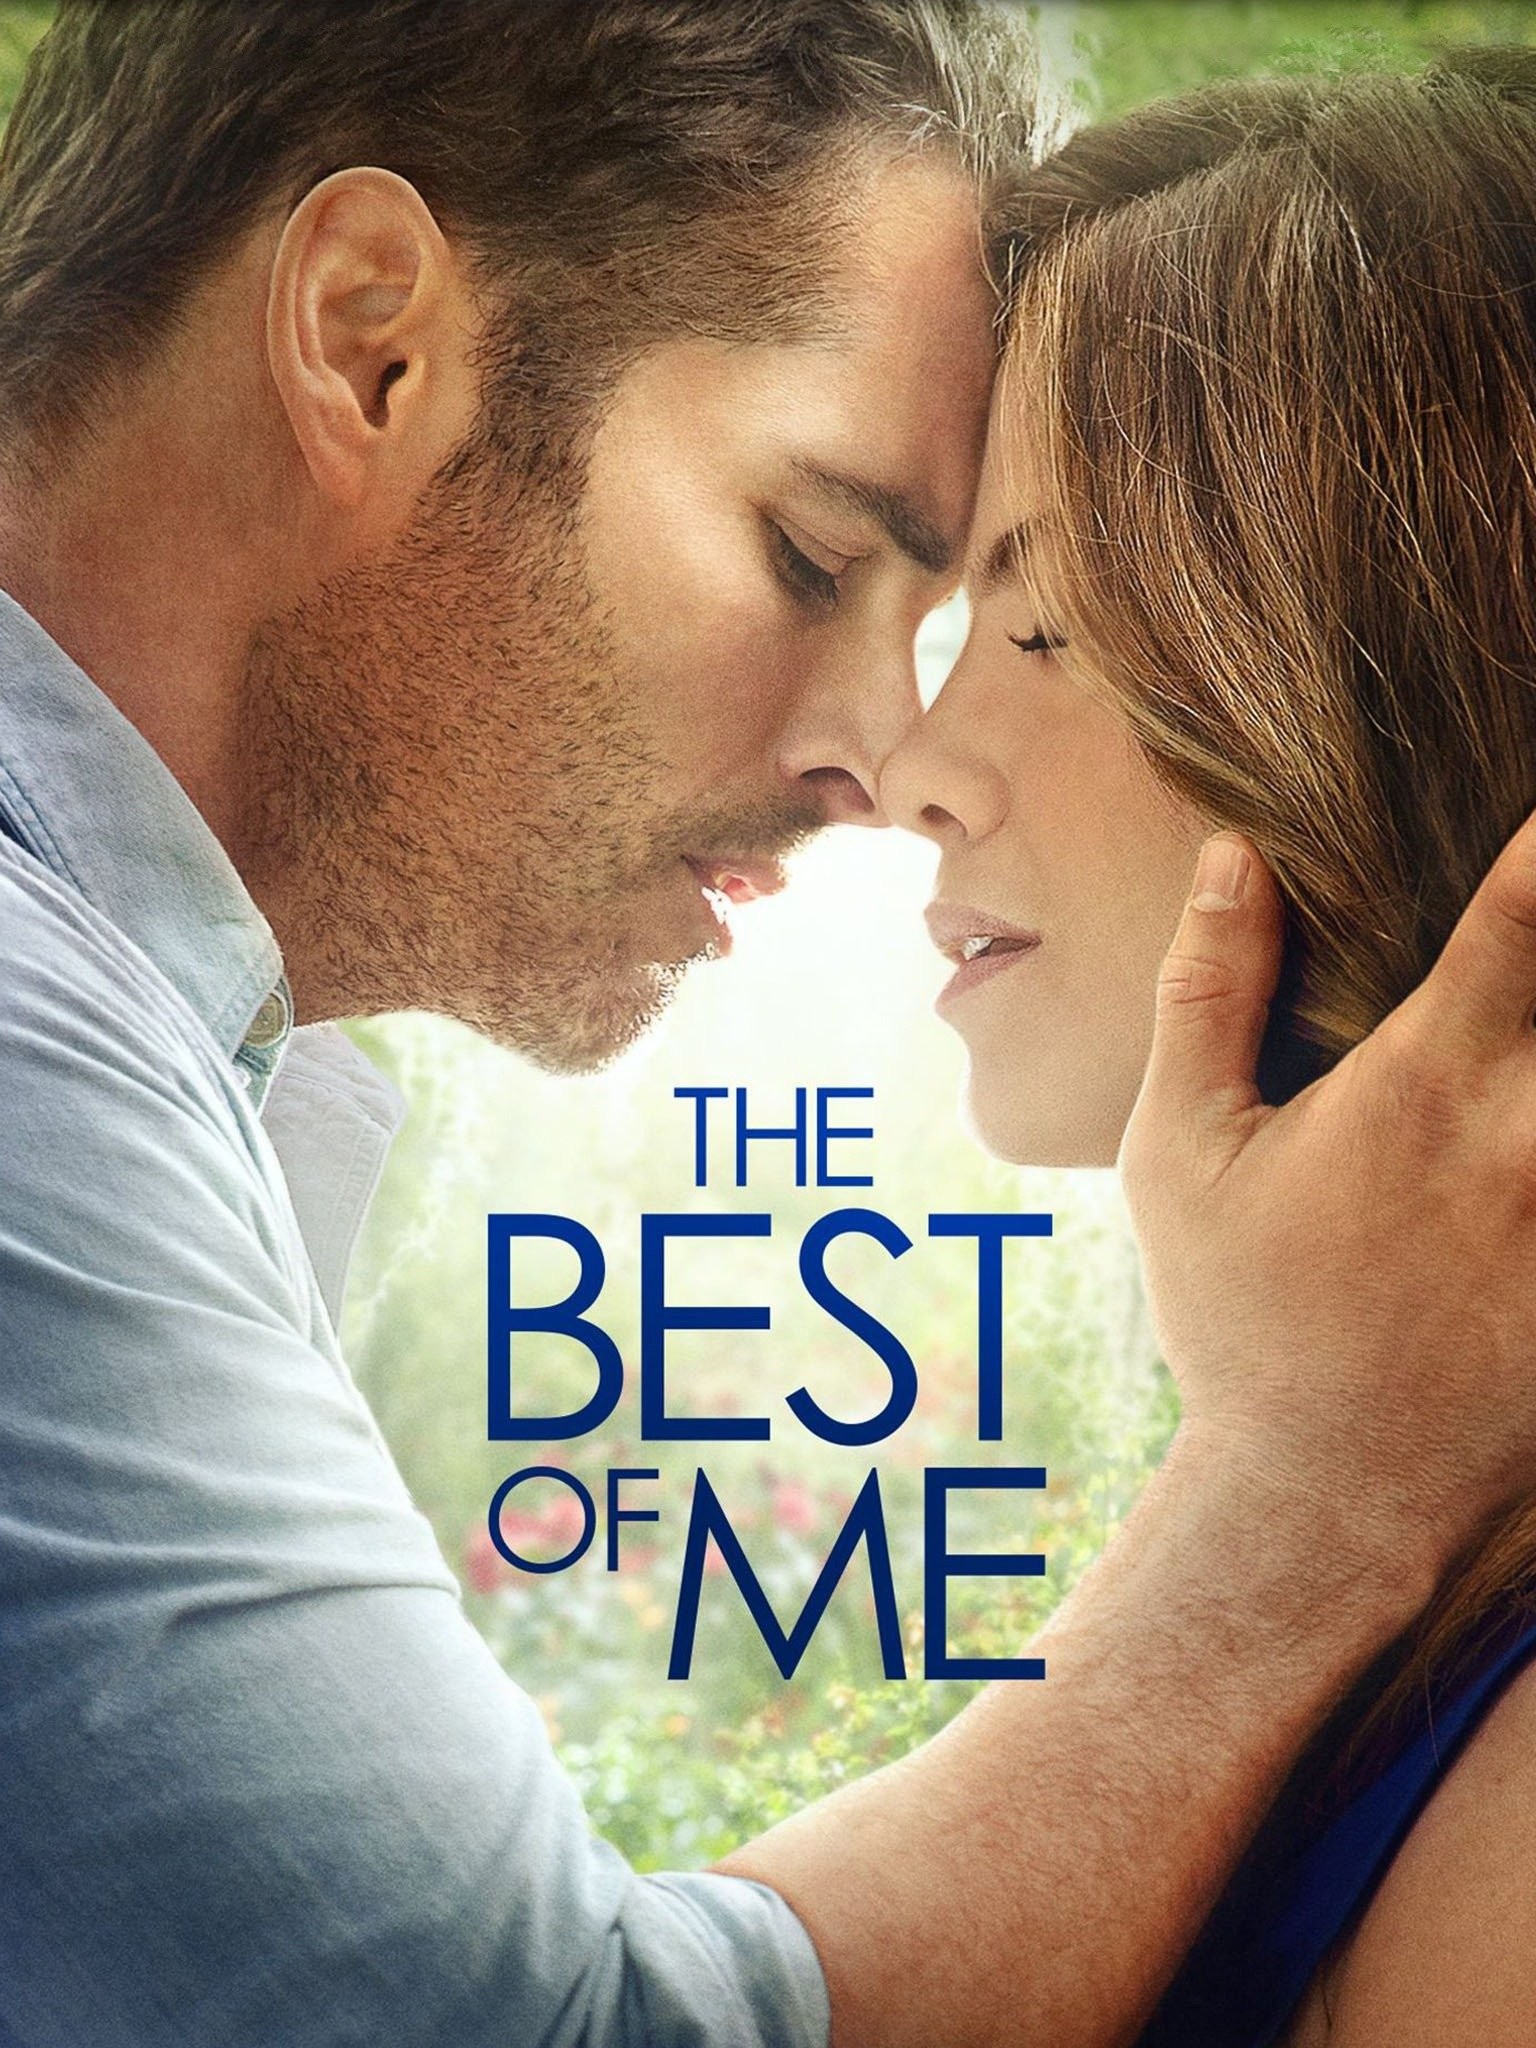 adeline poon recommends kiss me 2014 full movie pic